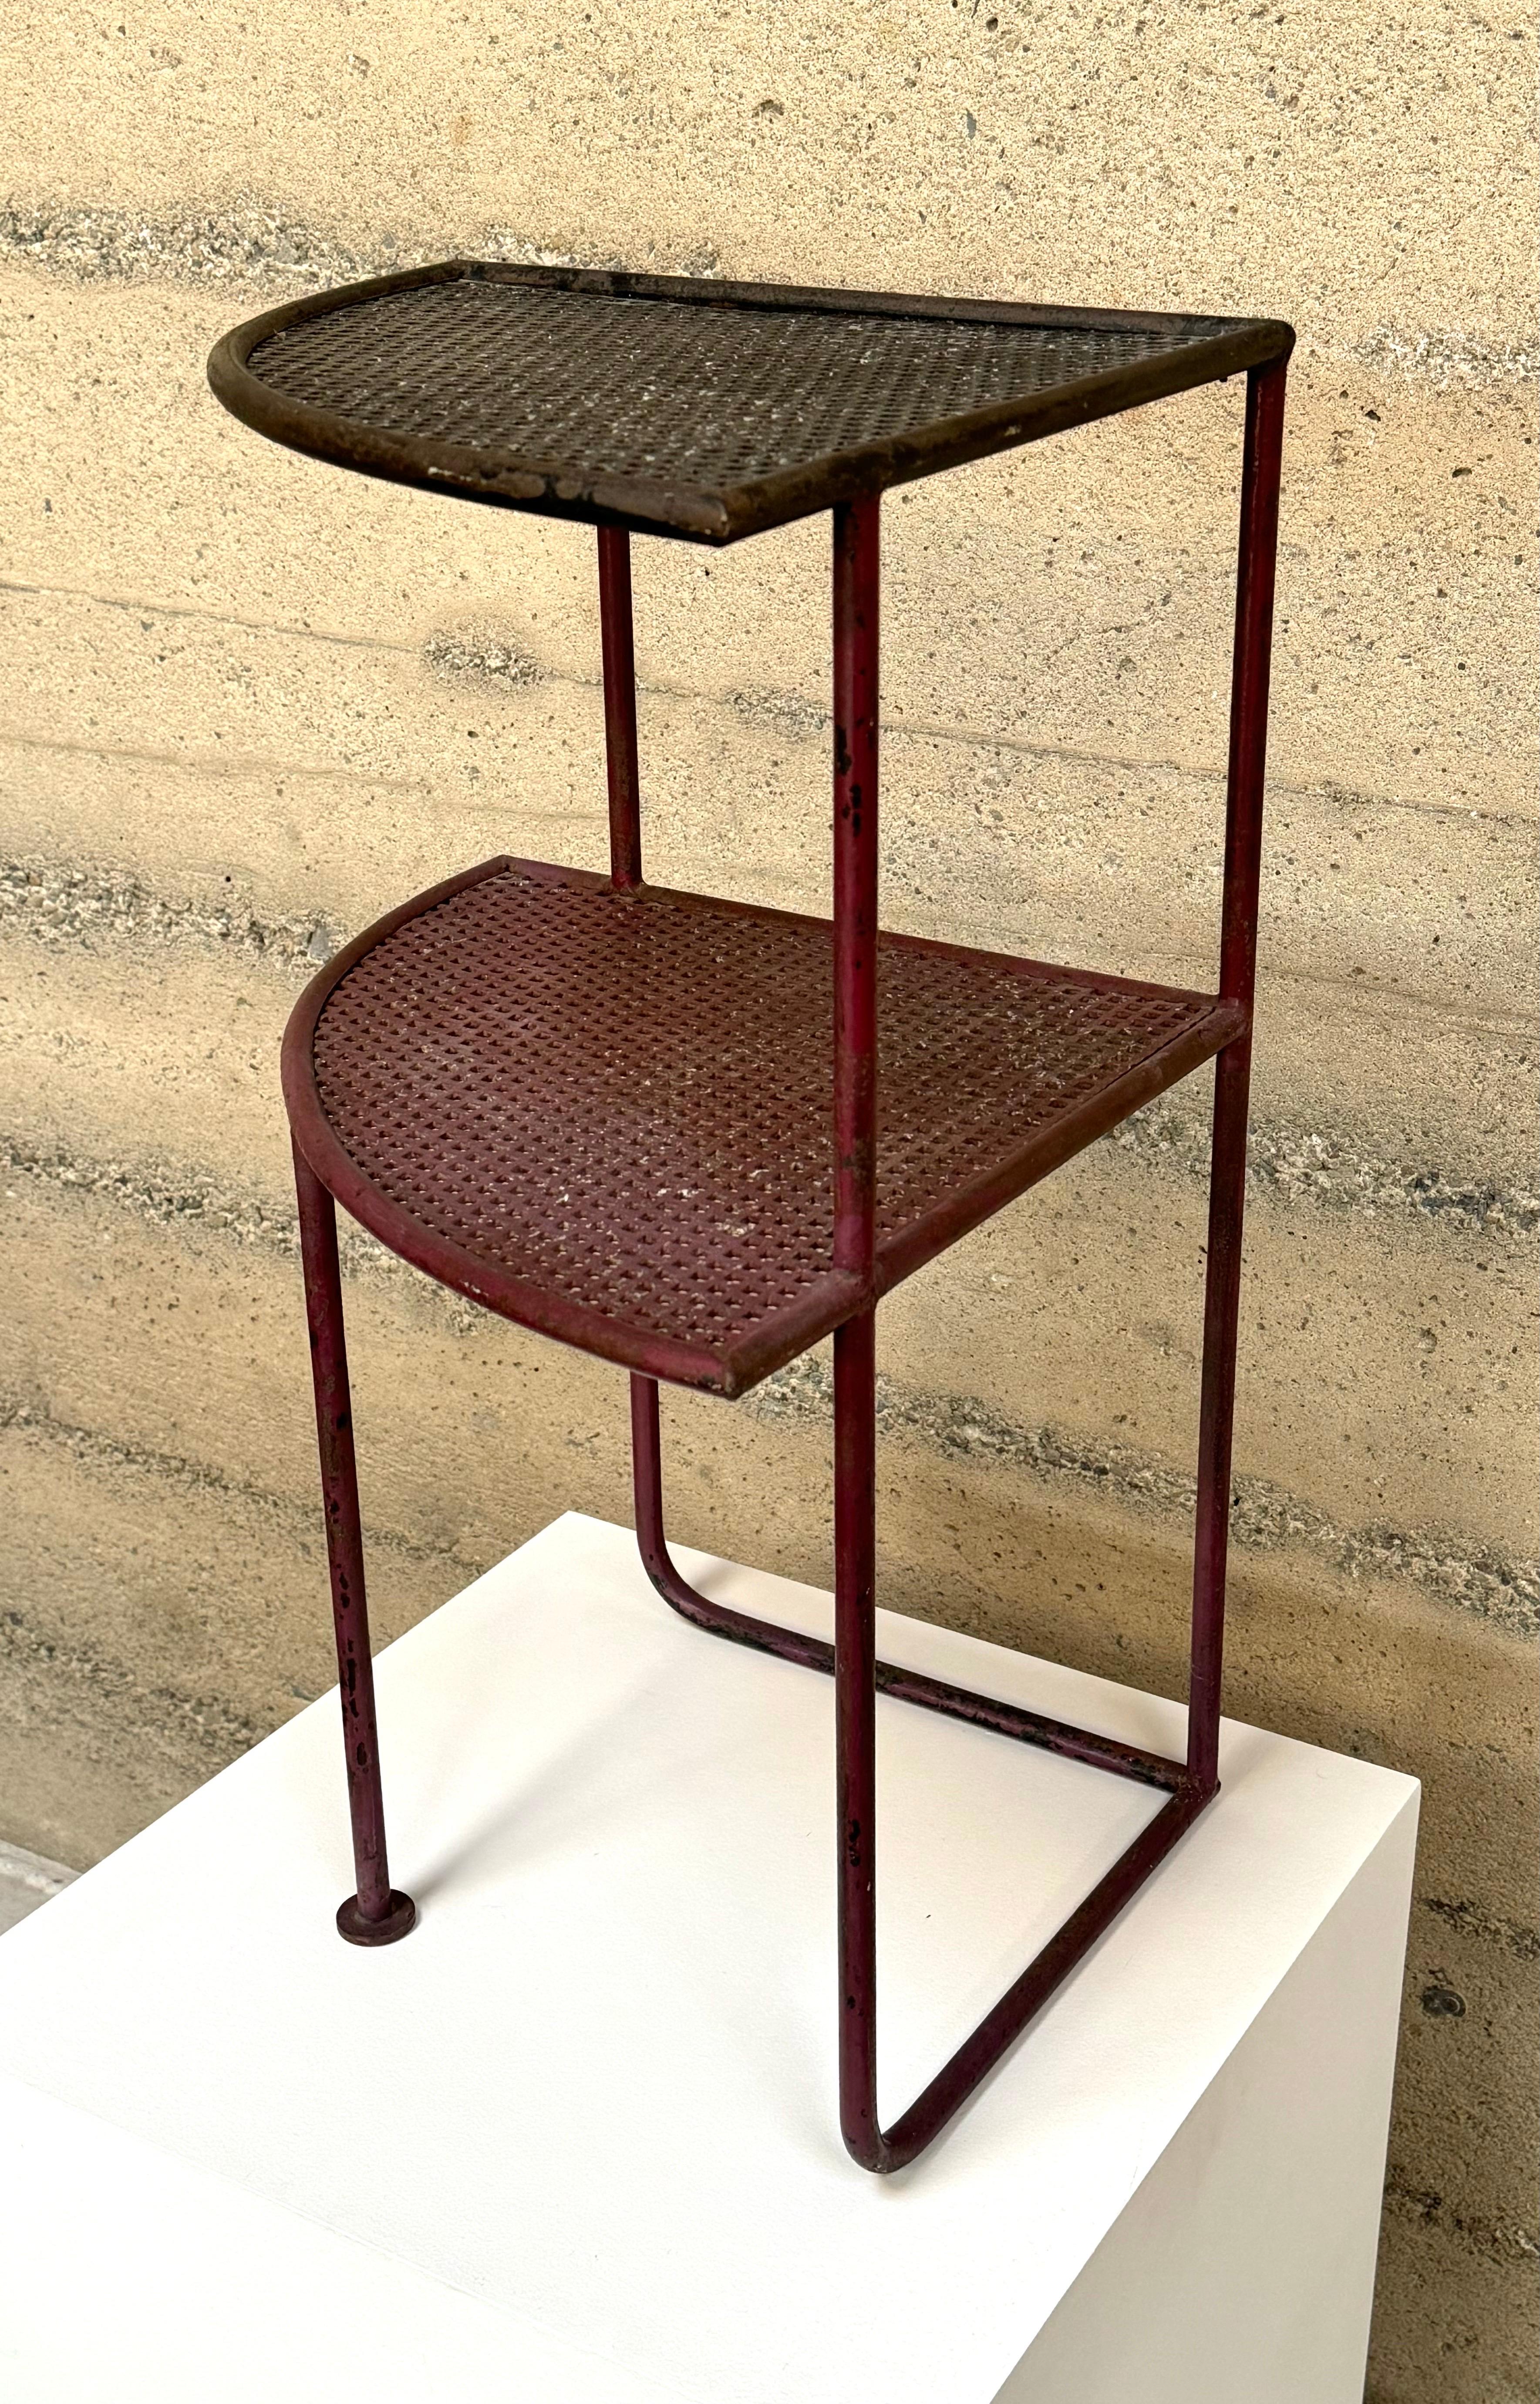 1950s Modernist French Iron with Perforated Metal Shelves Side Table In Good Condition For Sale In Oakland, CA